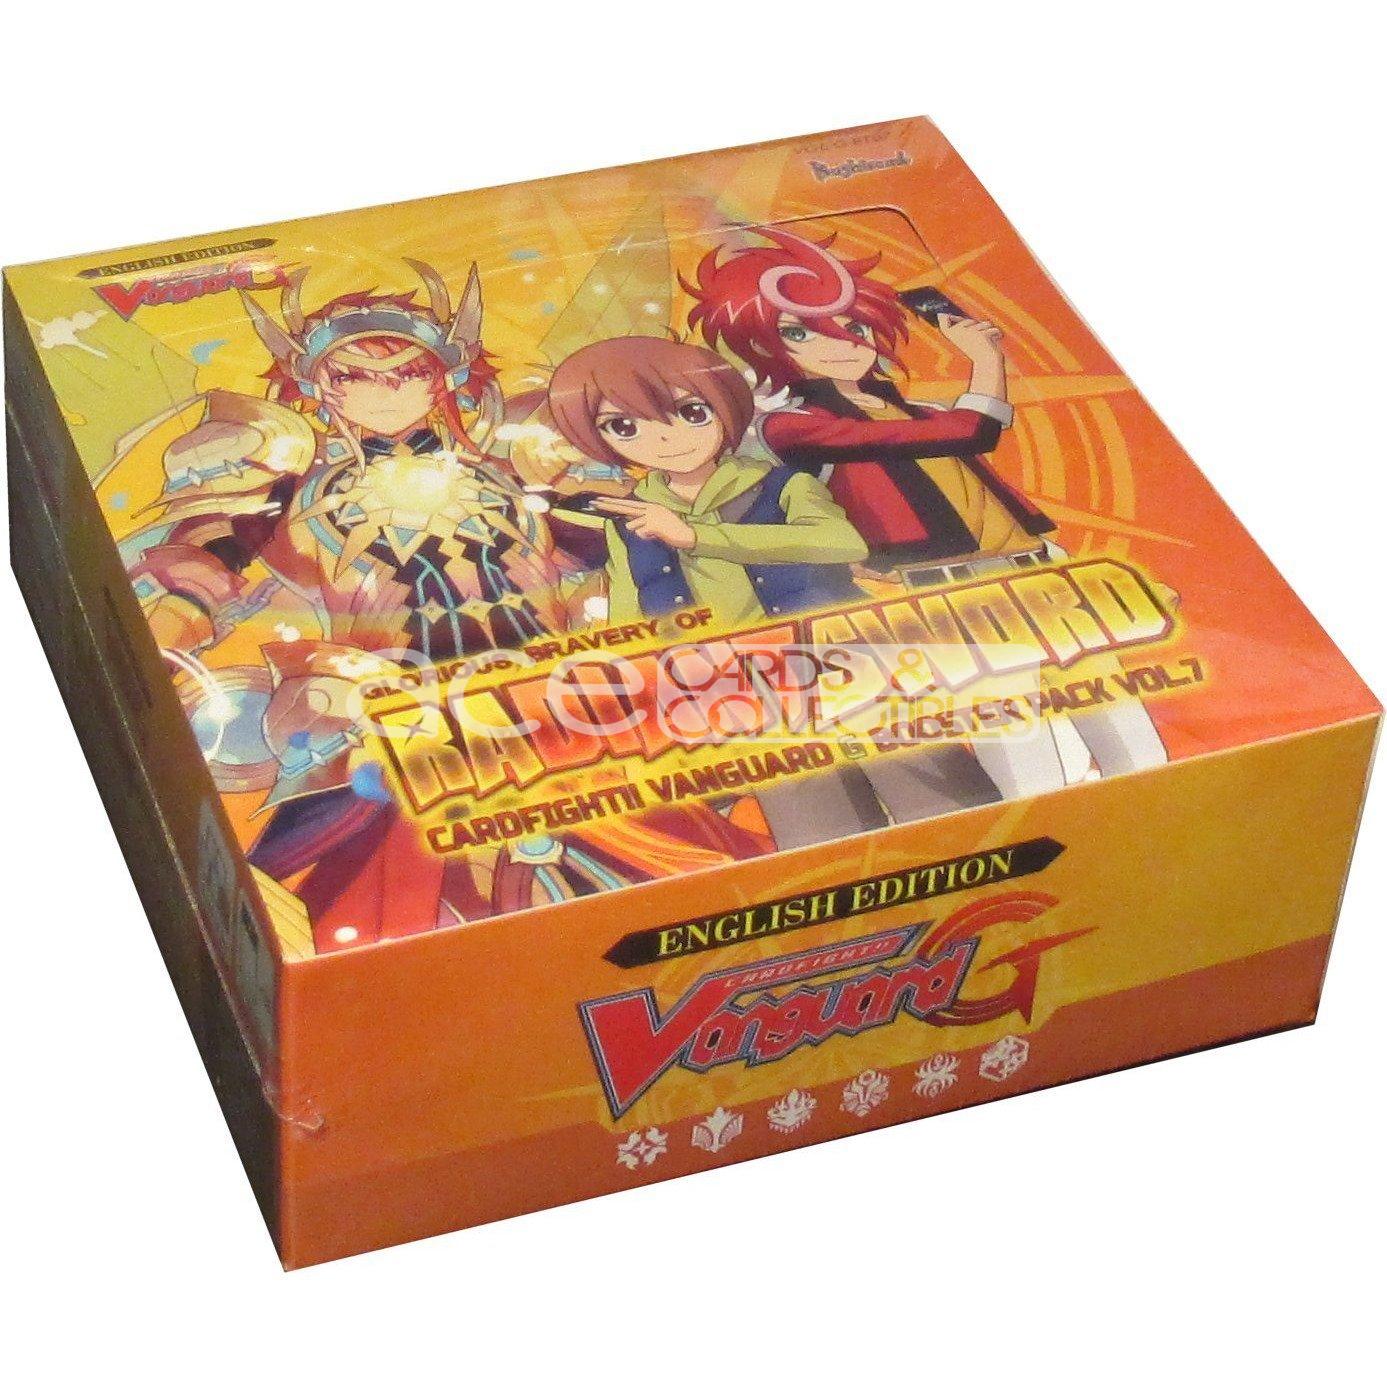 Cardfight Vanguard G Glorious Bravery of Radiant Sword [VGE-G-BT07] (English)-Single Pack (Random)-Bushiroad-Ace Cards & Collectibles